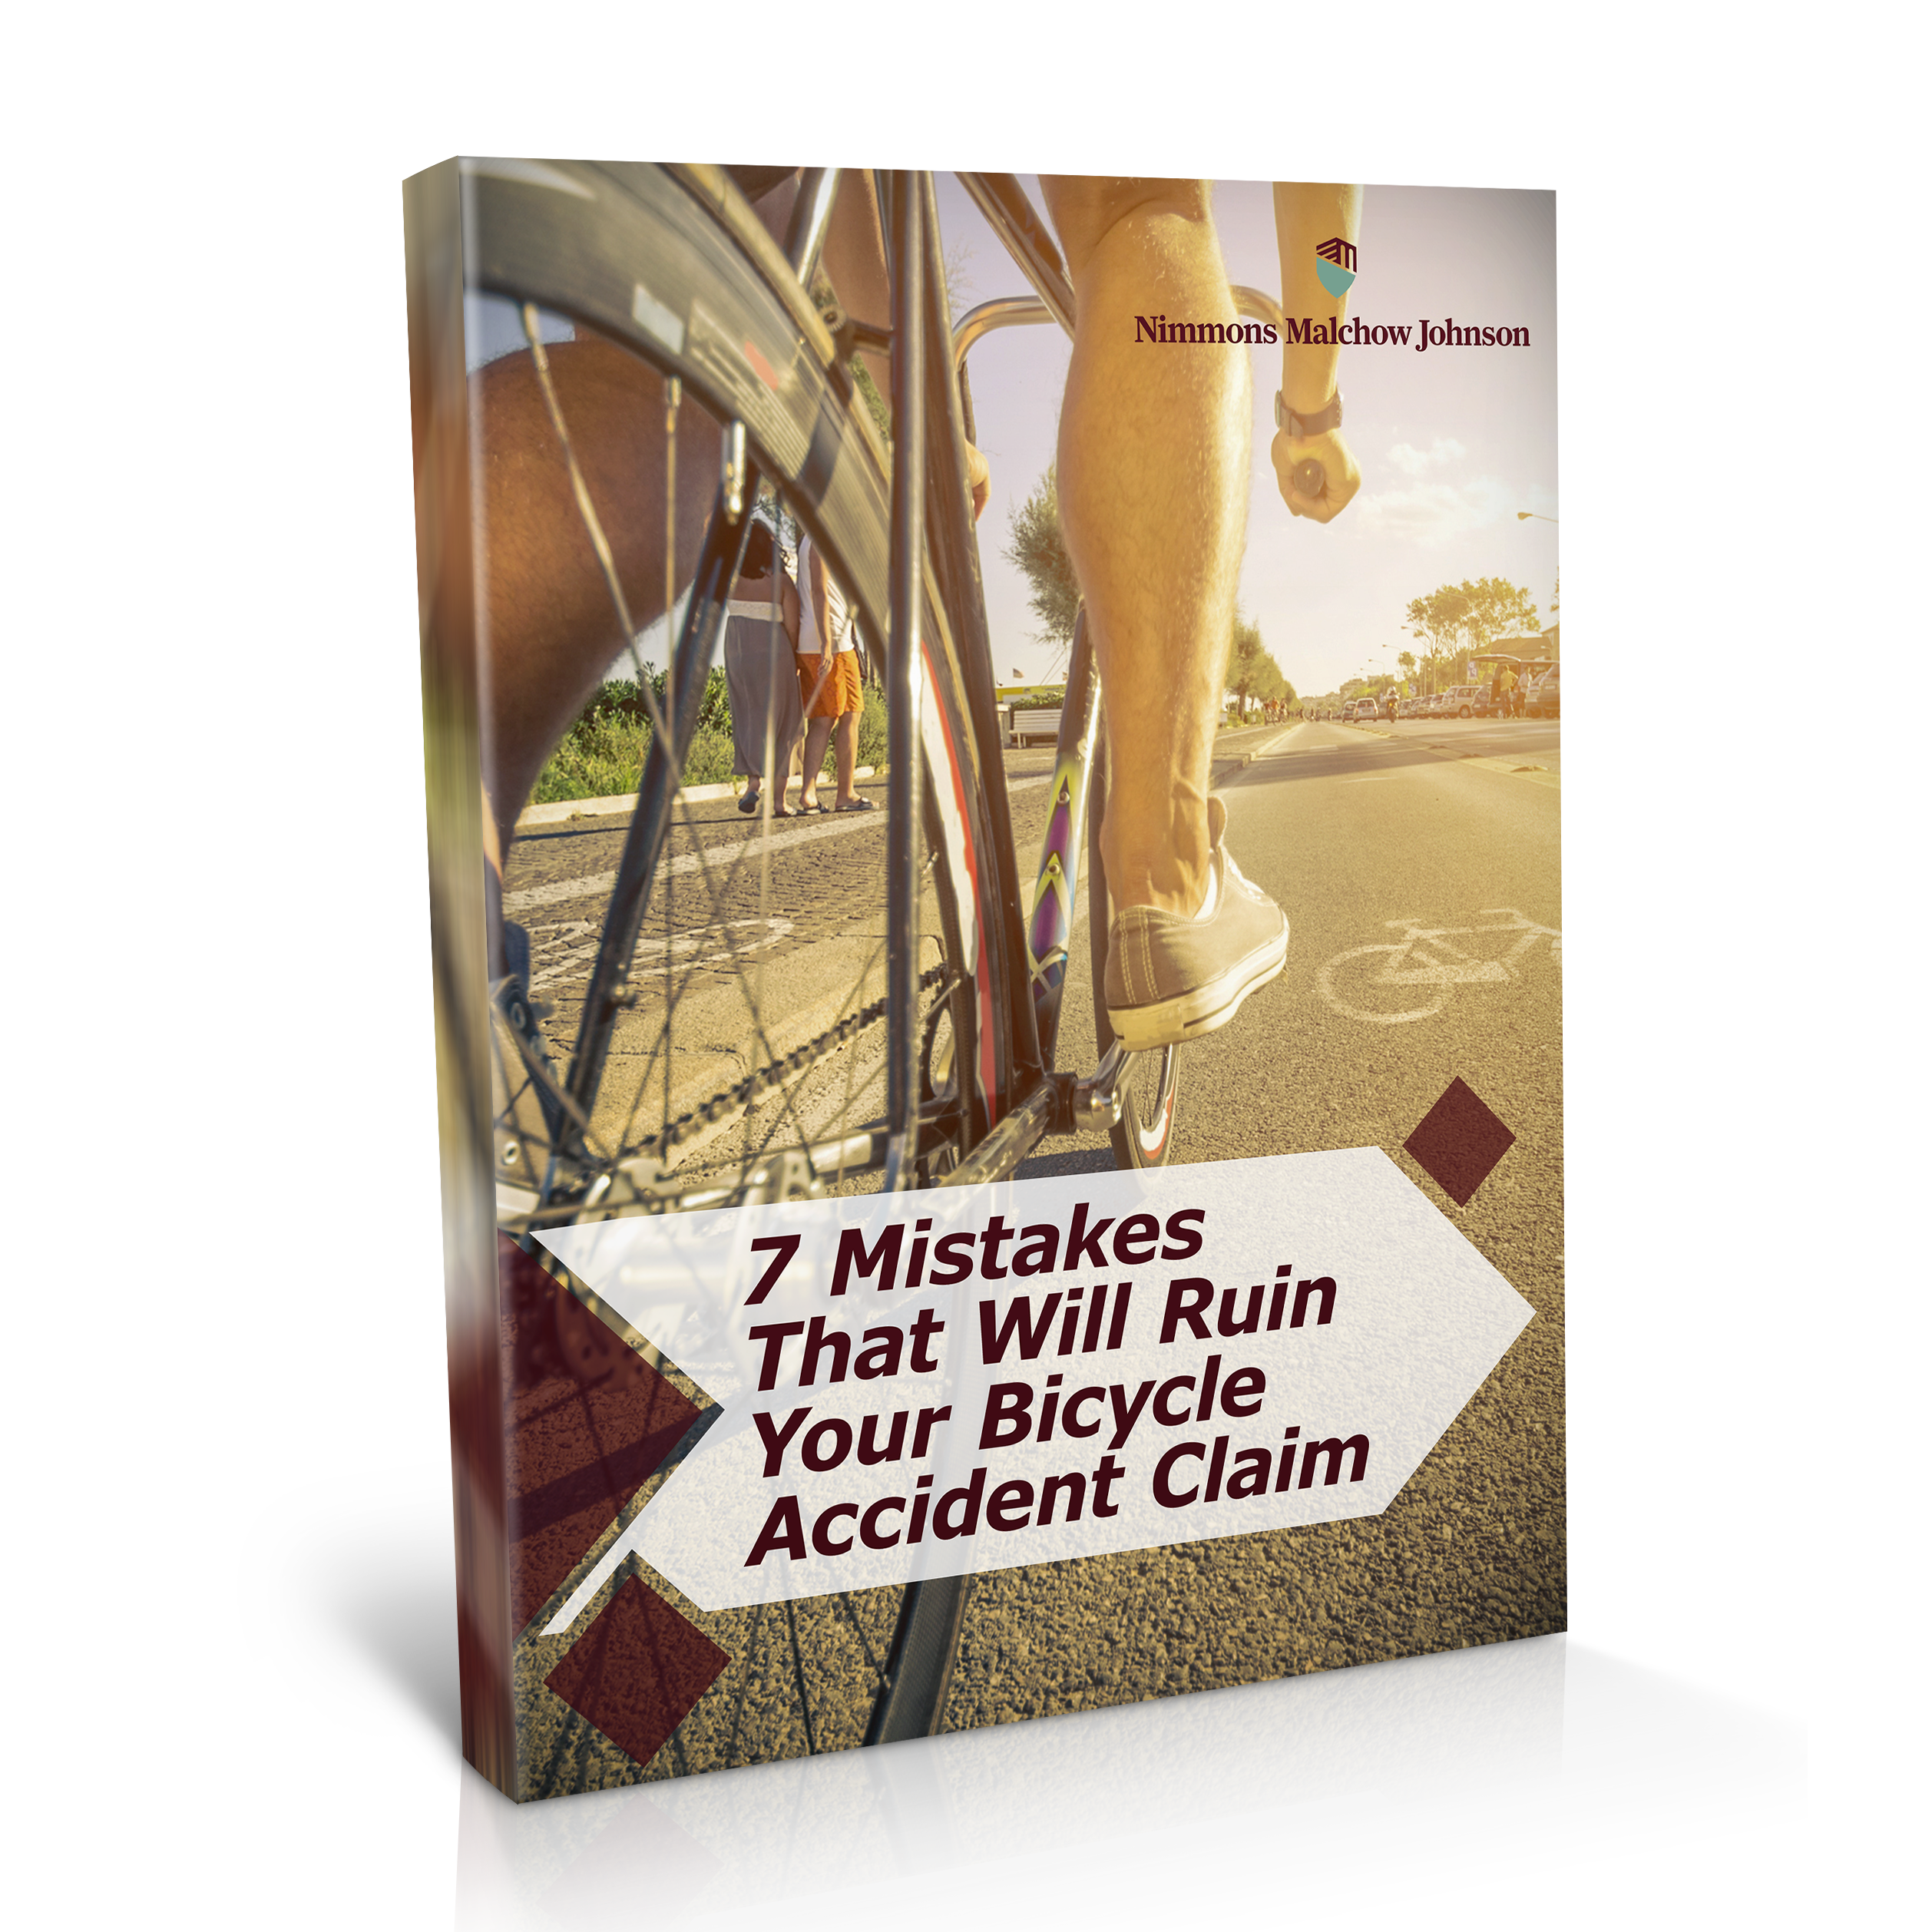 7 Mistakes People Make After Bicycle Accidents That Ruin Their Claim